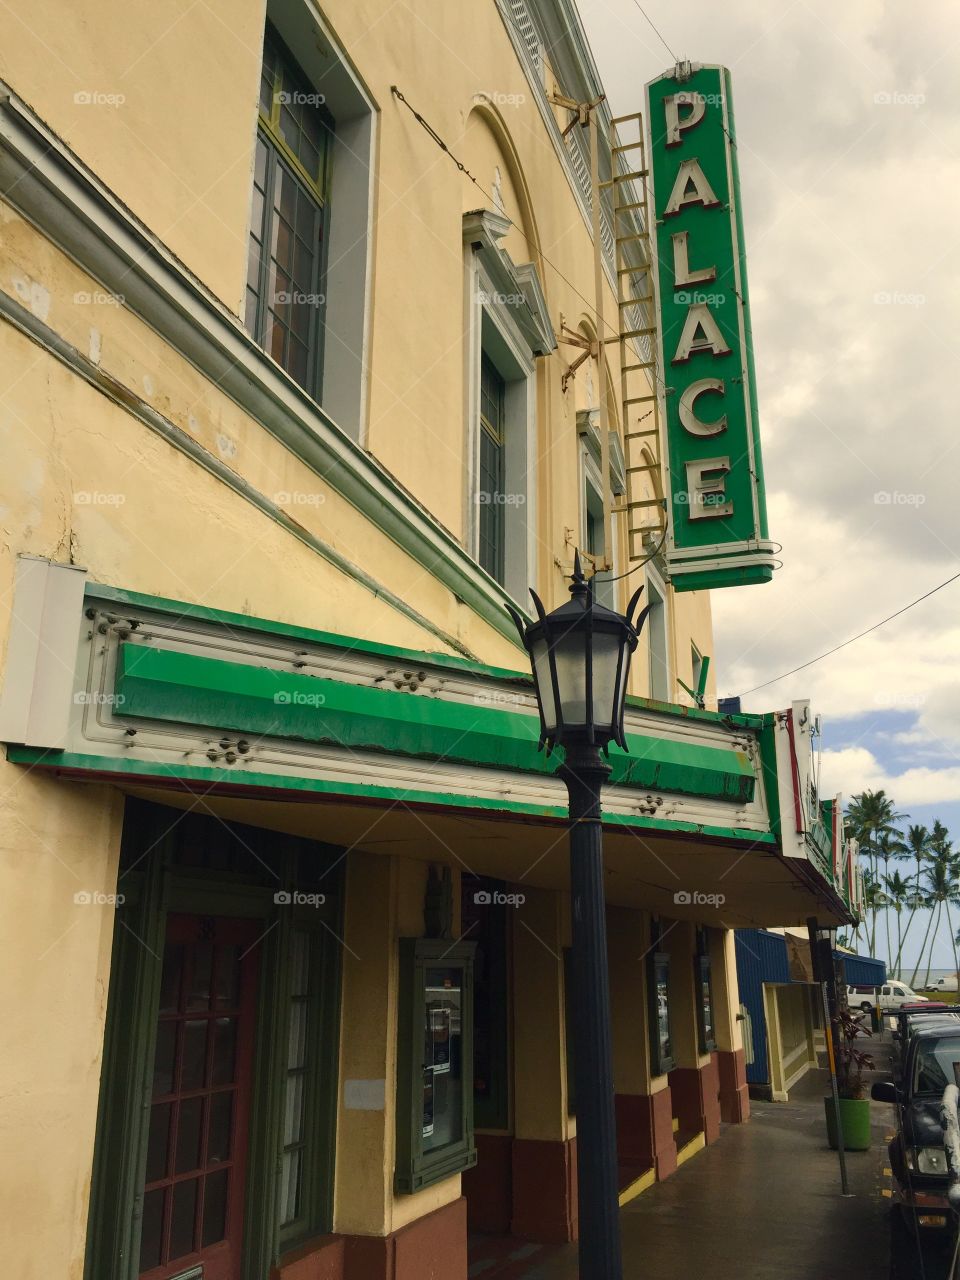 Old Theater in Hilo Hawaii